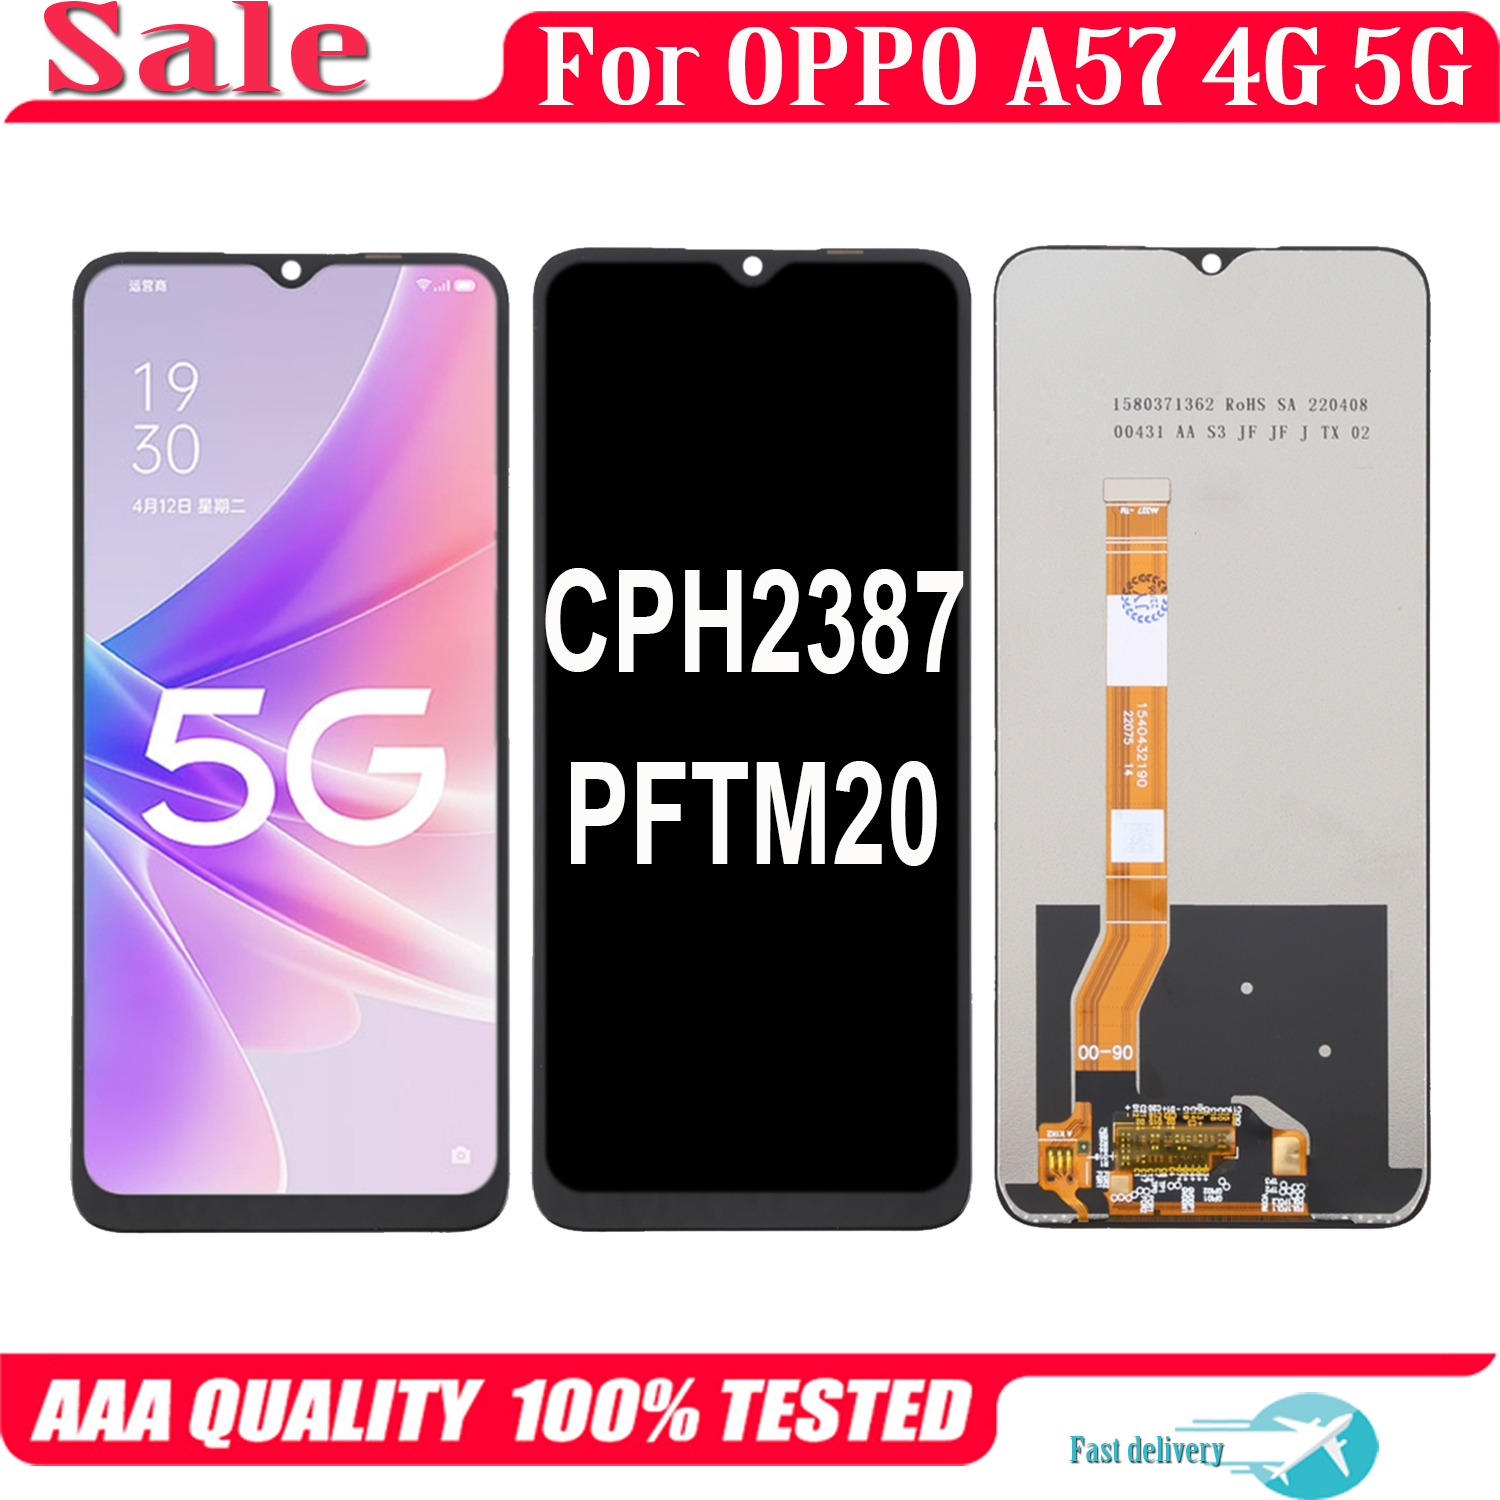 6 56 For OPPO A57 4G 5G PFTM20 CPH2387 LCD Display Touch Screen Replacement Digitizer Assembly